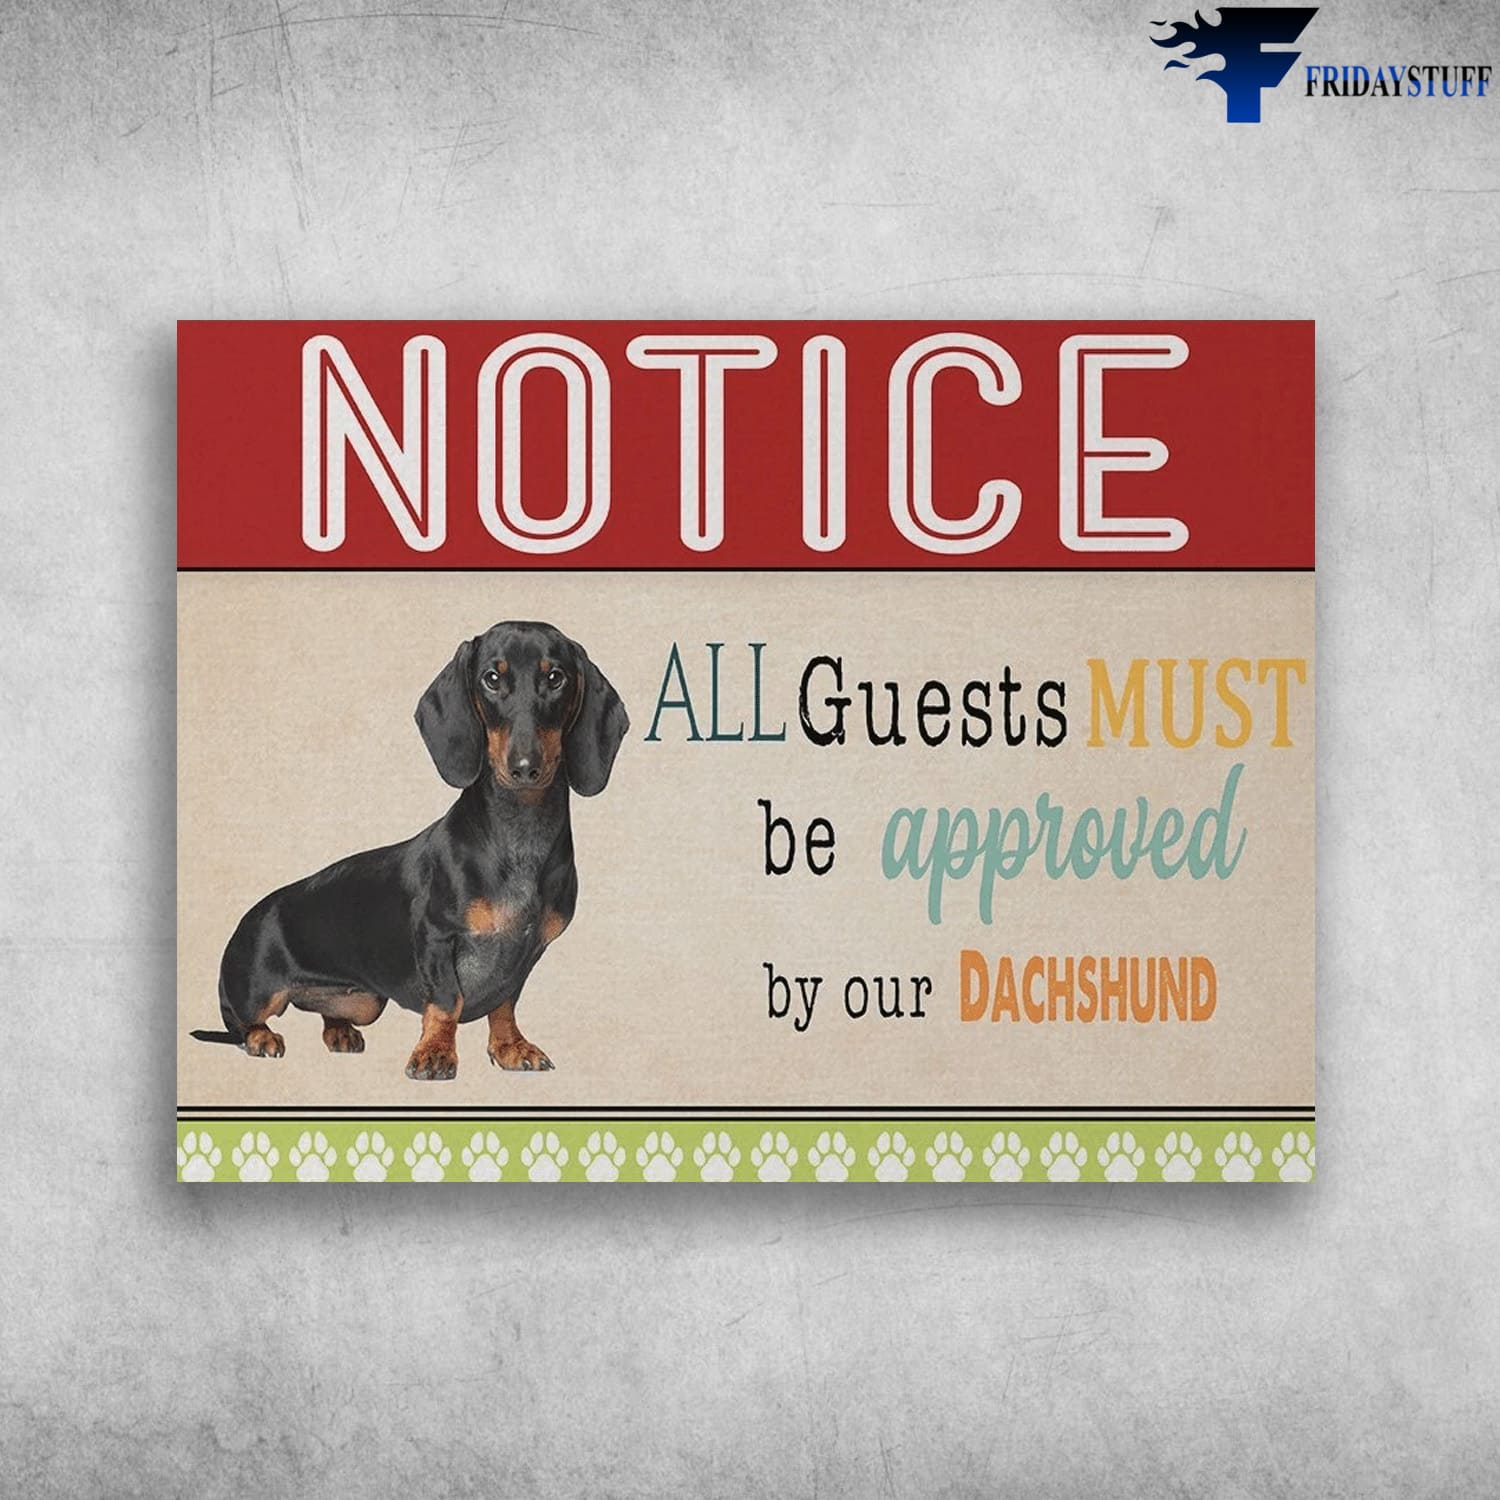 Dog Lover, Black Dachshund Dog, Notice, All Guests Must Be Approved, By Our Dachshund